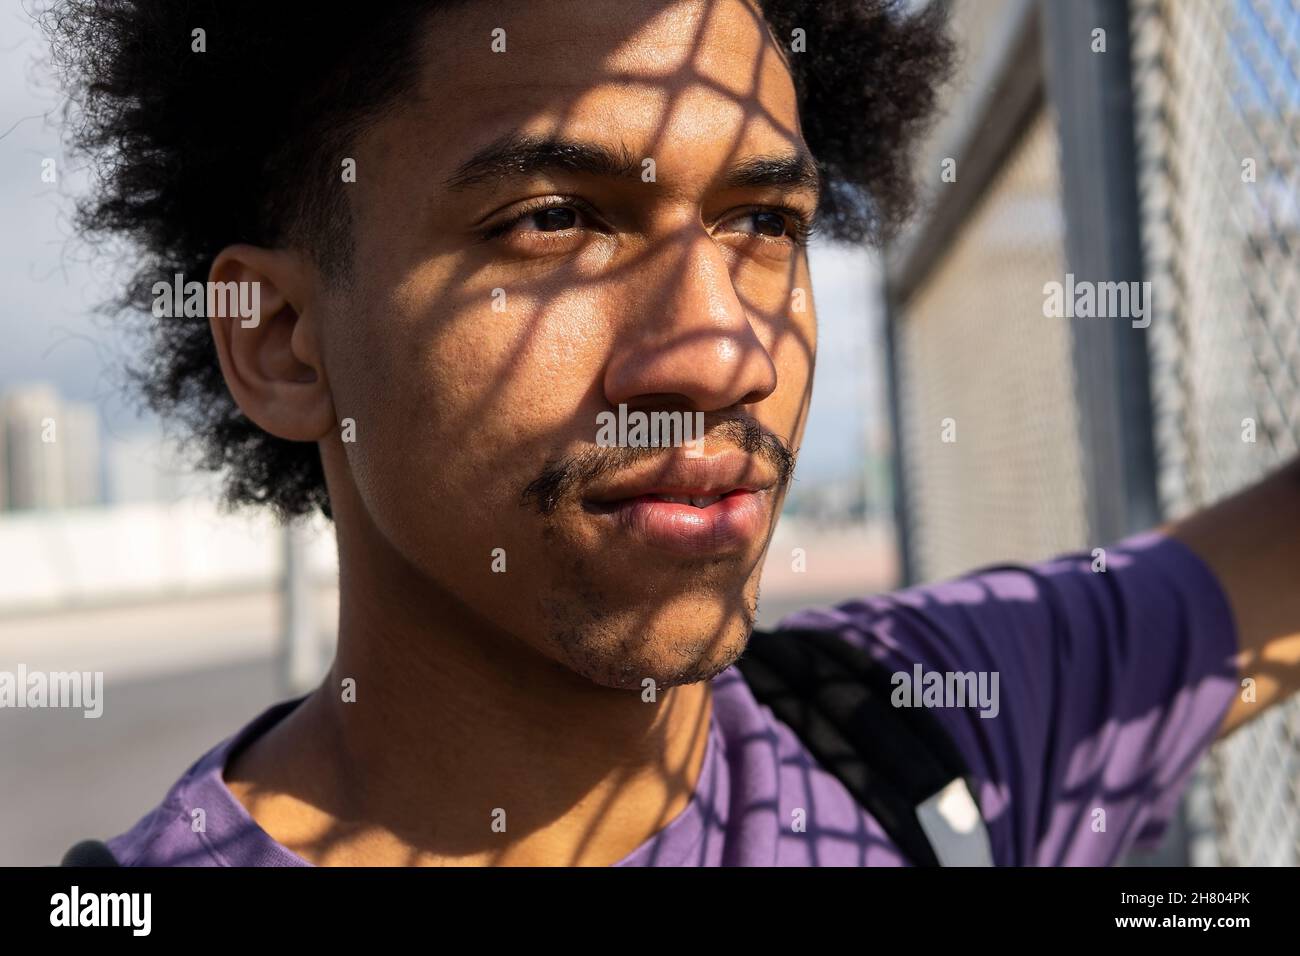 African American male with Afro curls and shadow from metal net looking away with thoughtful glance Stock Photo